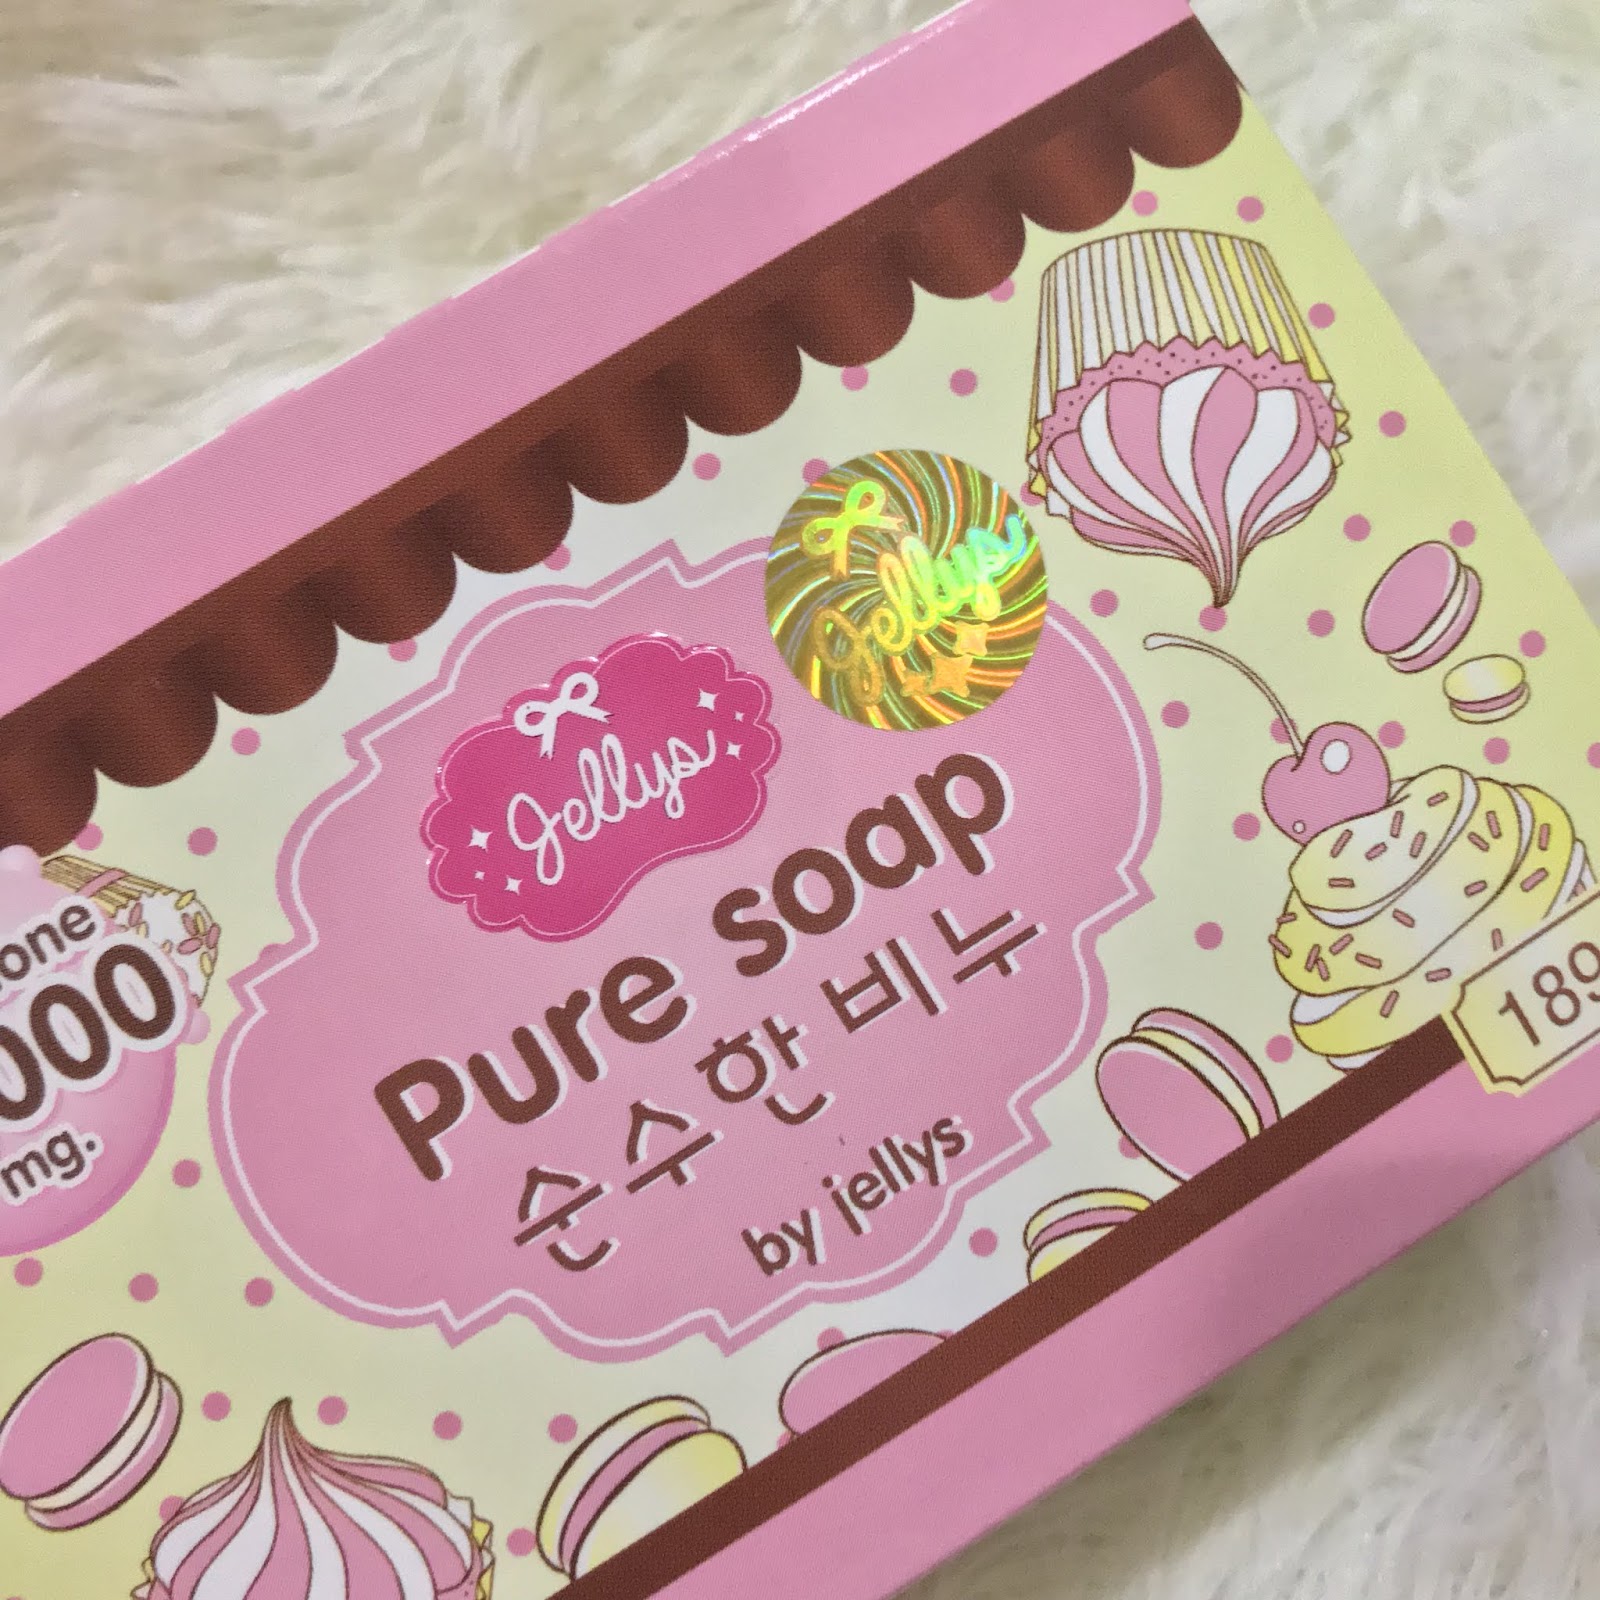 REVIEW) Jellys Thailand : Pure Soap